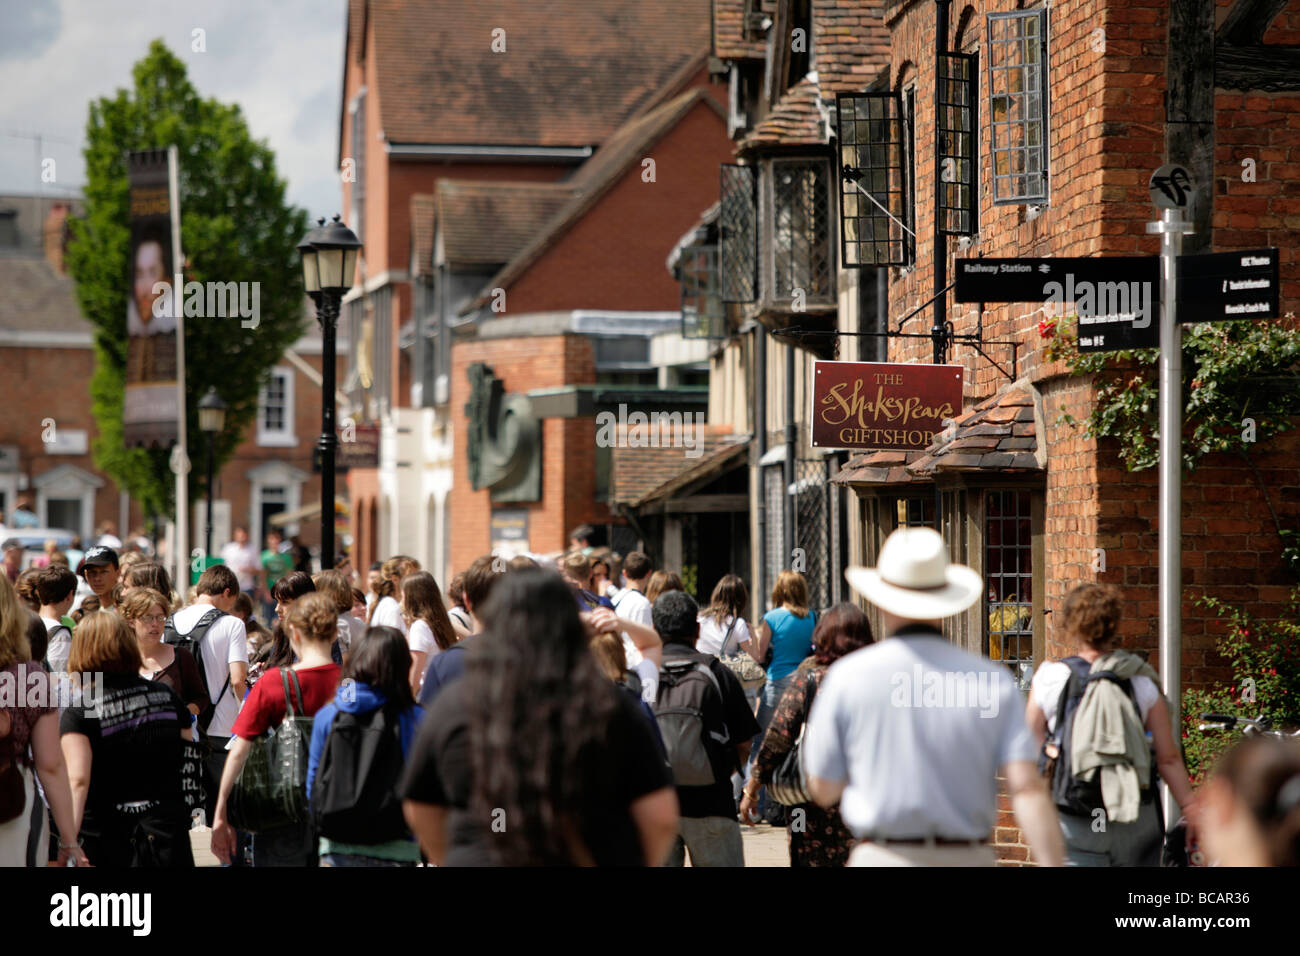 Tourists on Henley Street in Stratford-upon-Avon, UK. Shakespeare's birthplace was in a house on this street. Stock Photo